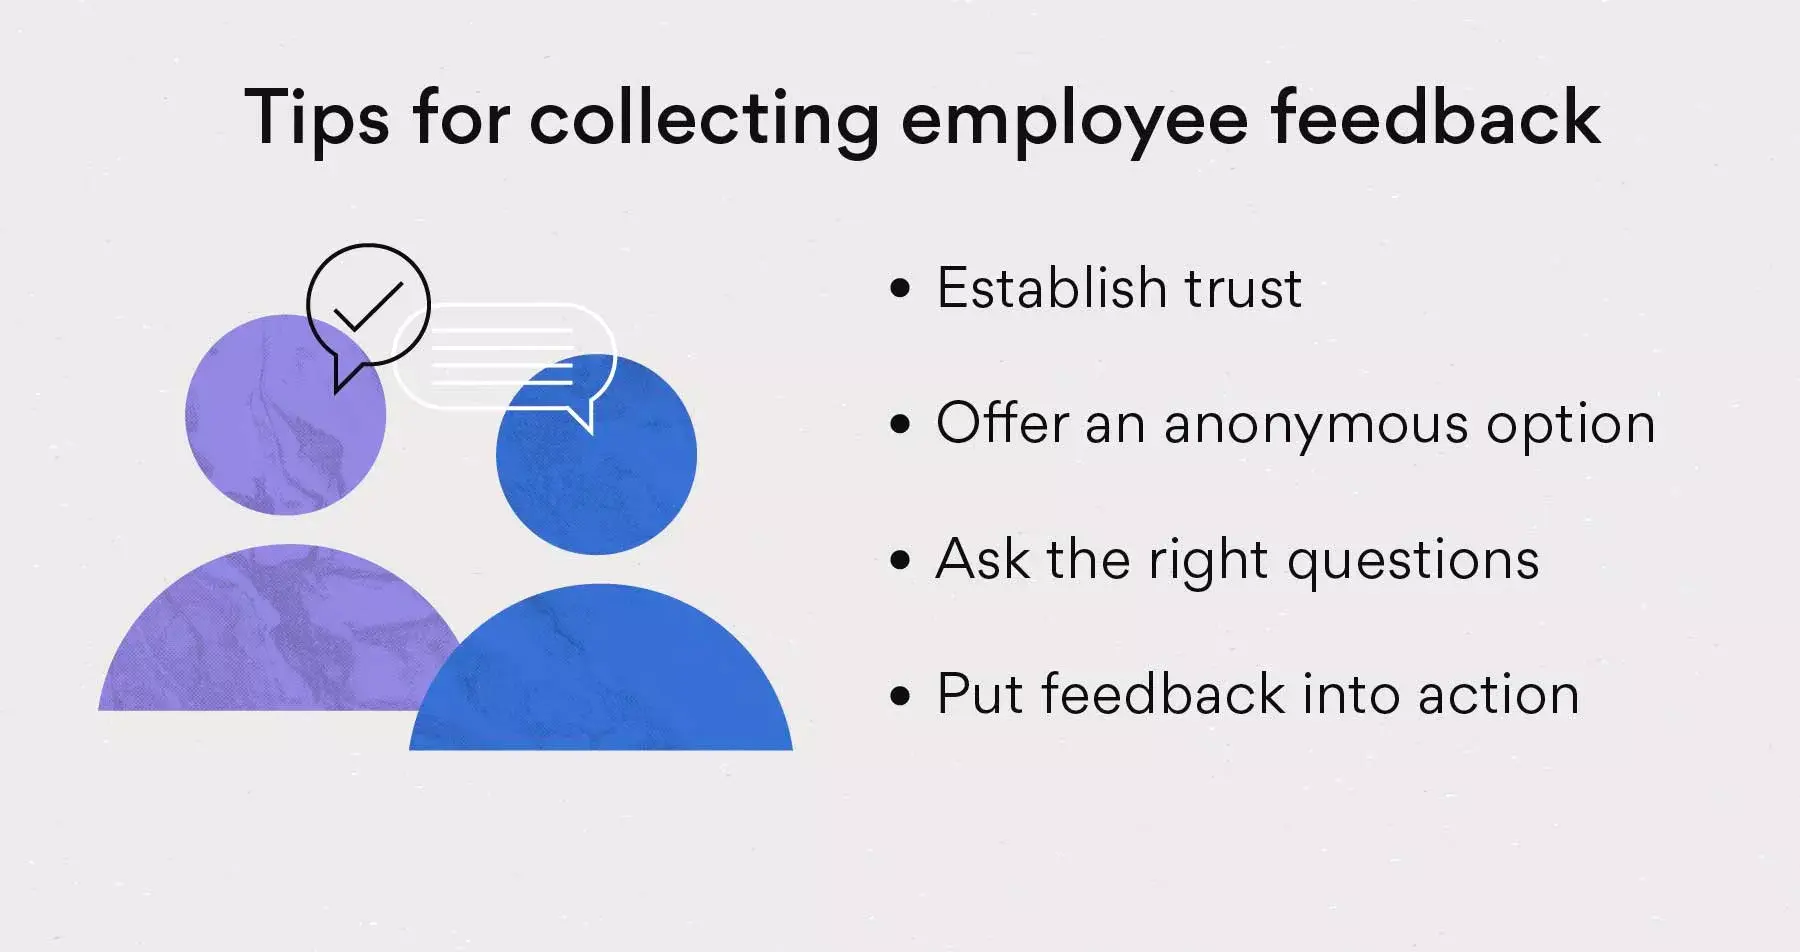 [inline illustration] Tips for collecting employee feedback (infographic)